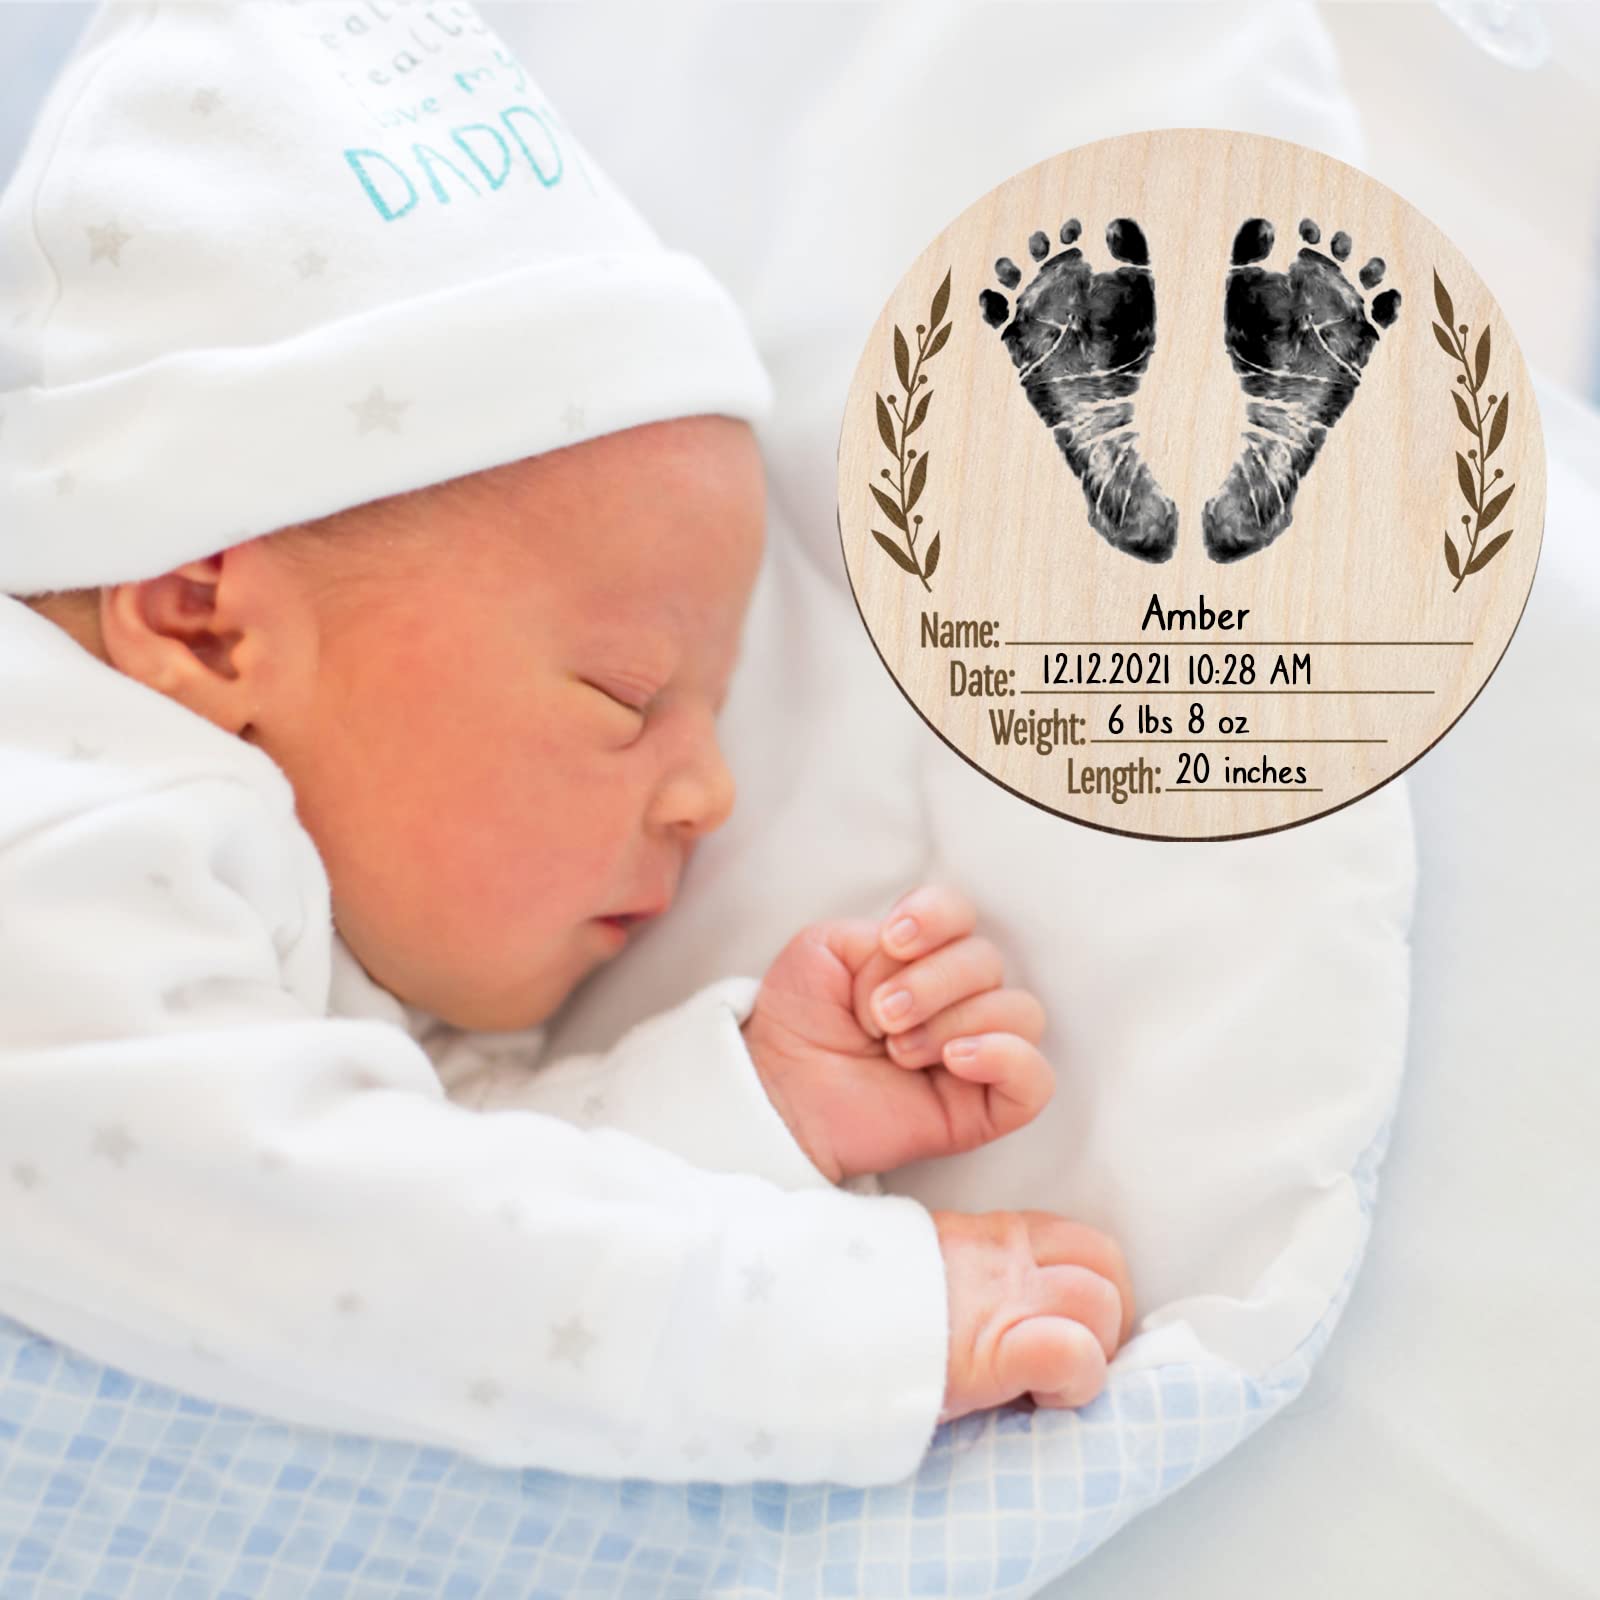 Mayyi Newborn Birth Announcement Sign,Personalized Baby Announcement，Custom Engraved Wooden Baby